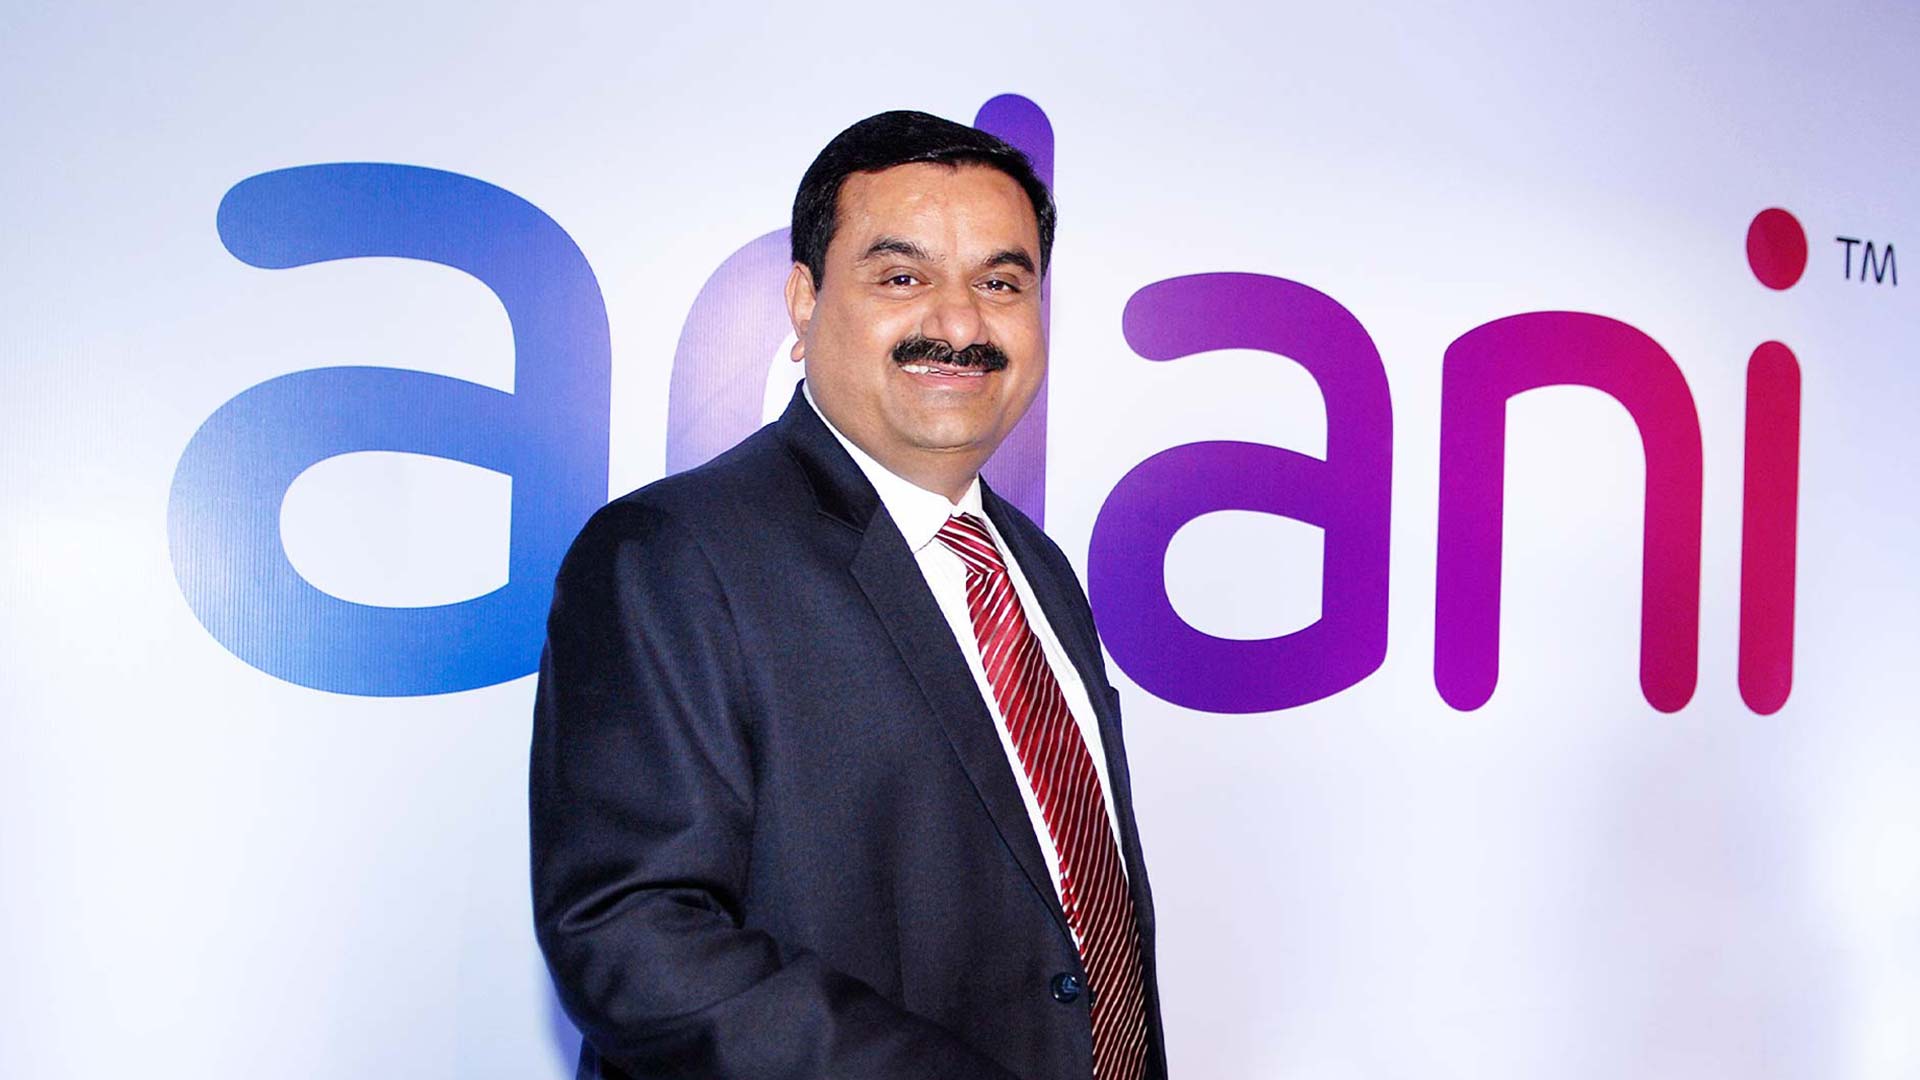 Adani in Discussions with Middle East Investment Groups for ACC, Ambuja Buy